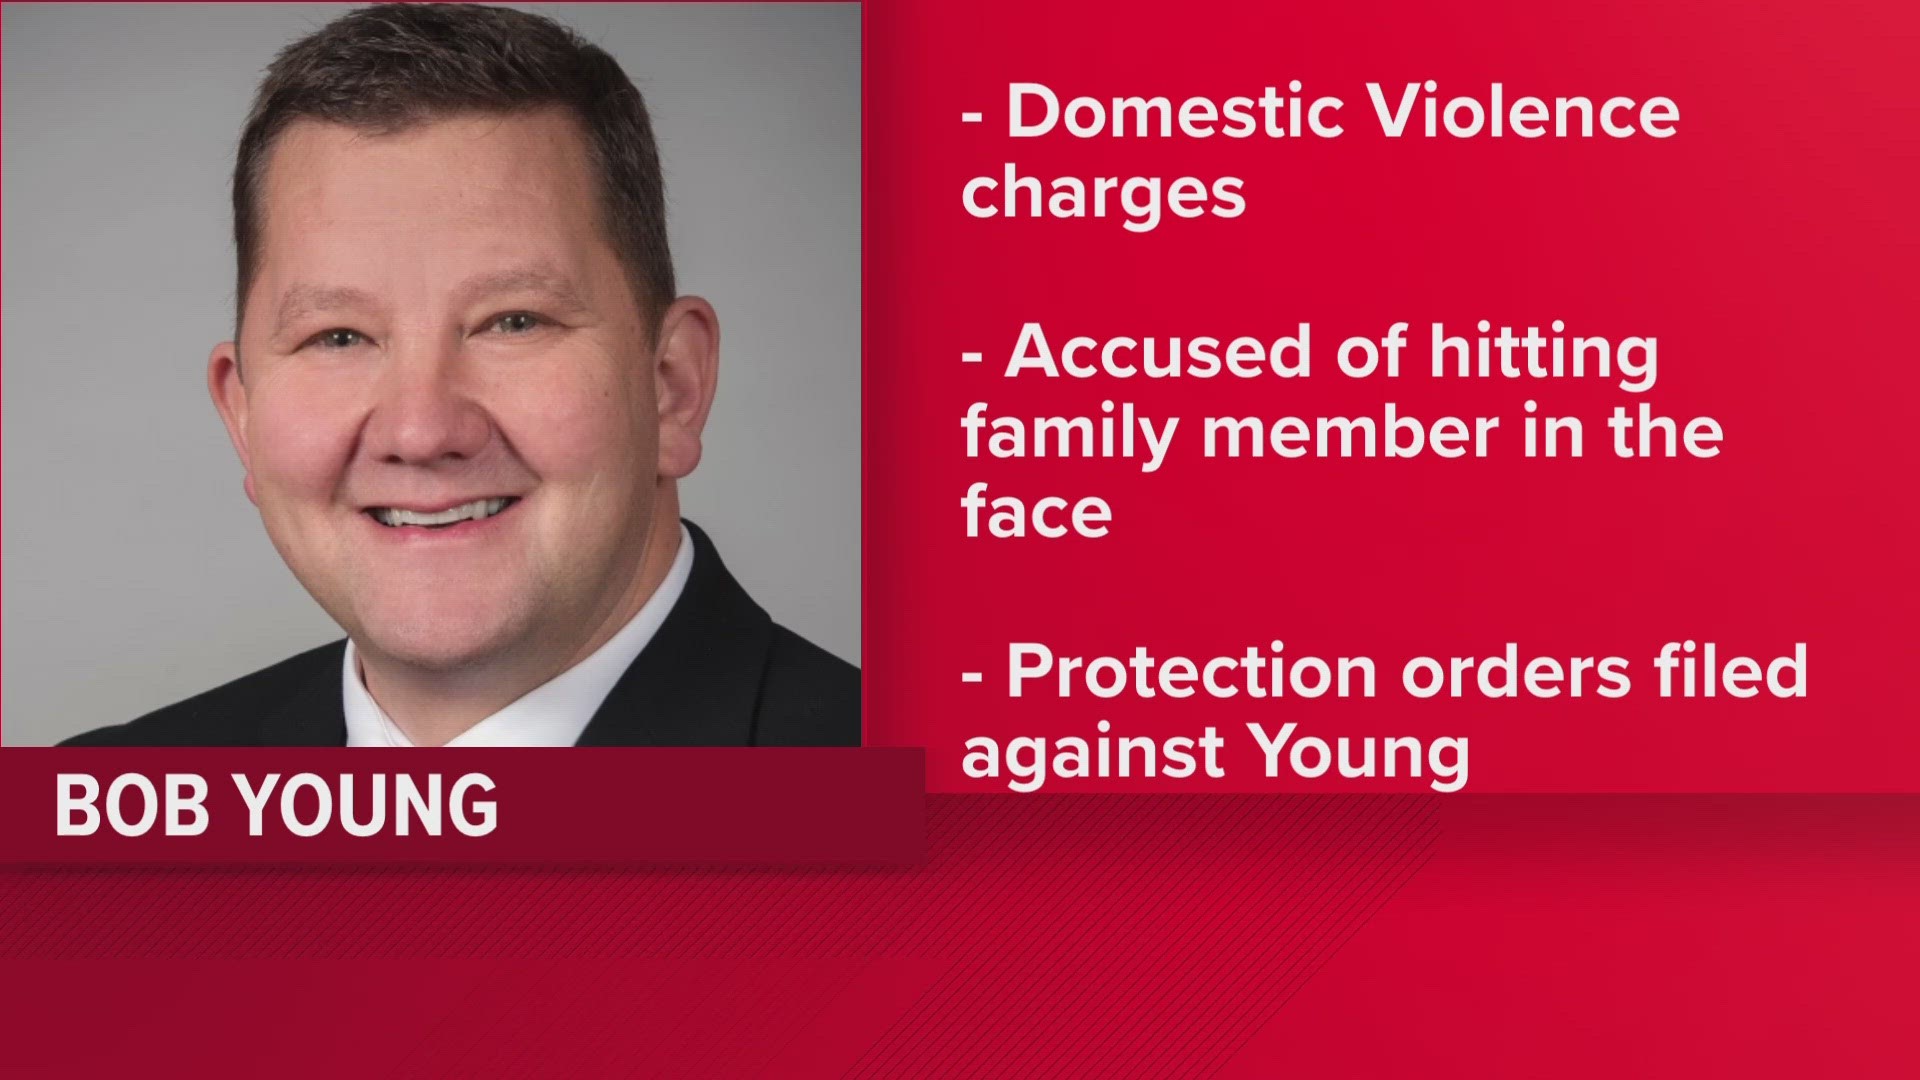 State Rep. Bob Young was arrested and charged with domestic violence over the weekend. House Speaker Jason Stephens has called for Young's resignation.